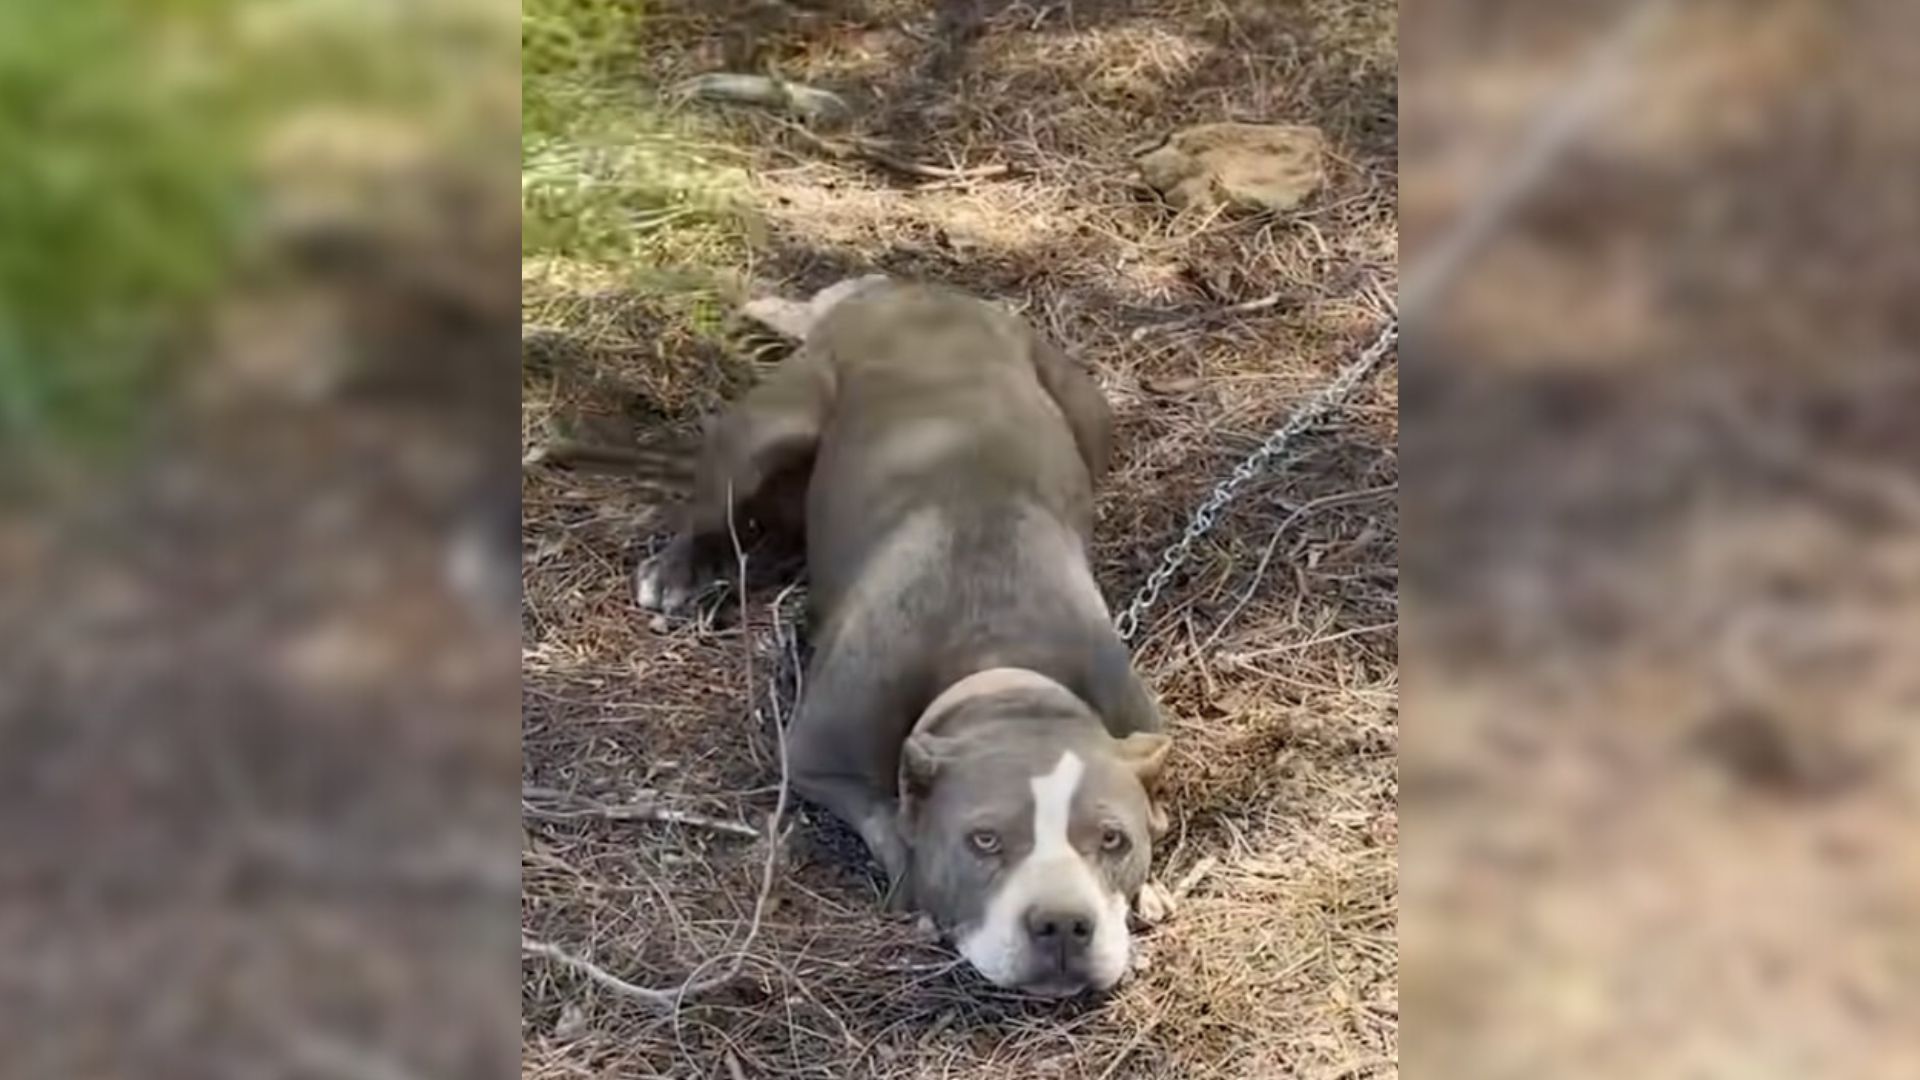 Rescuers Shocked To Find A Pitbull Tied To A Fence In A Distant Location